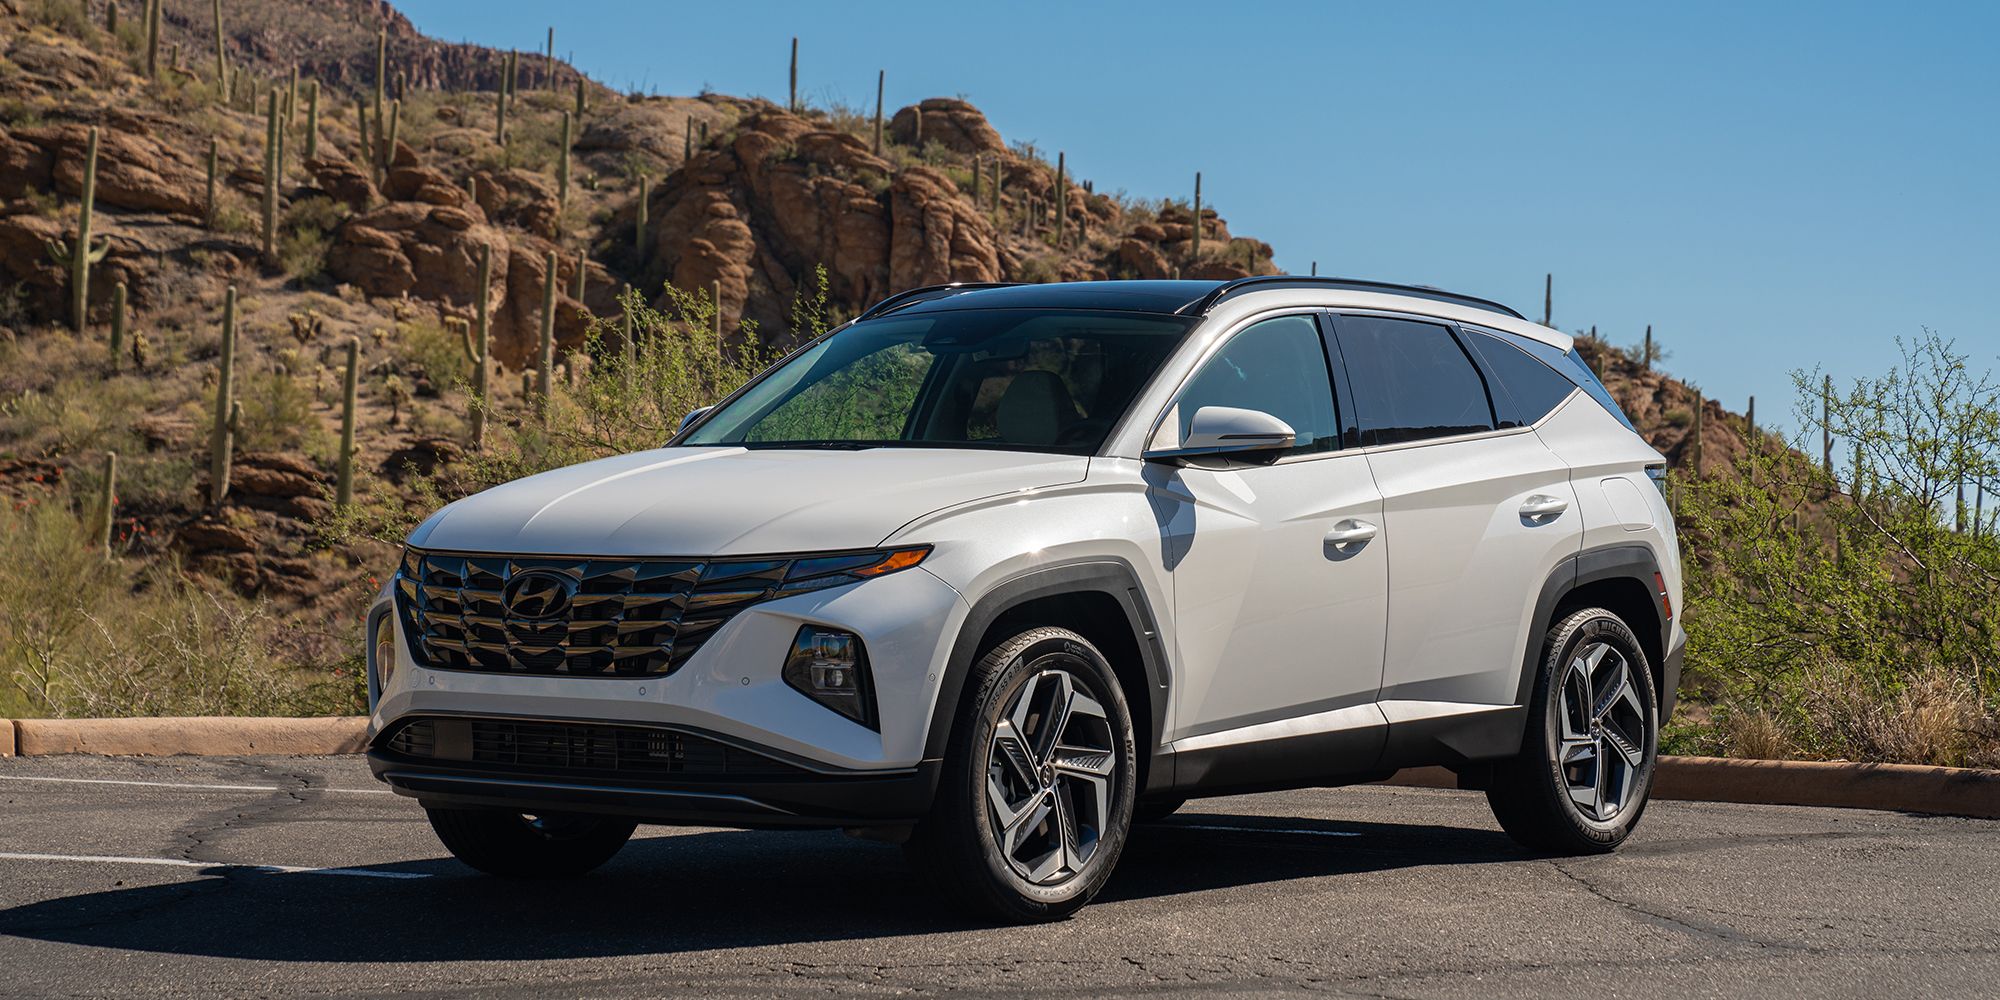 These Are The 10 Best Crossover SUVs On The American Market Right Now